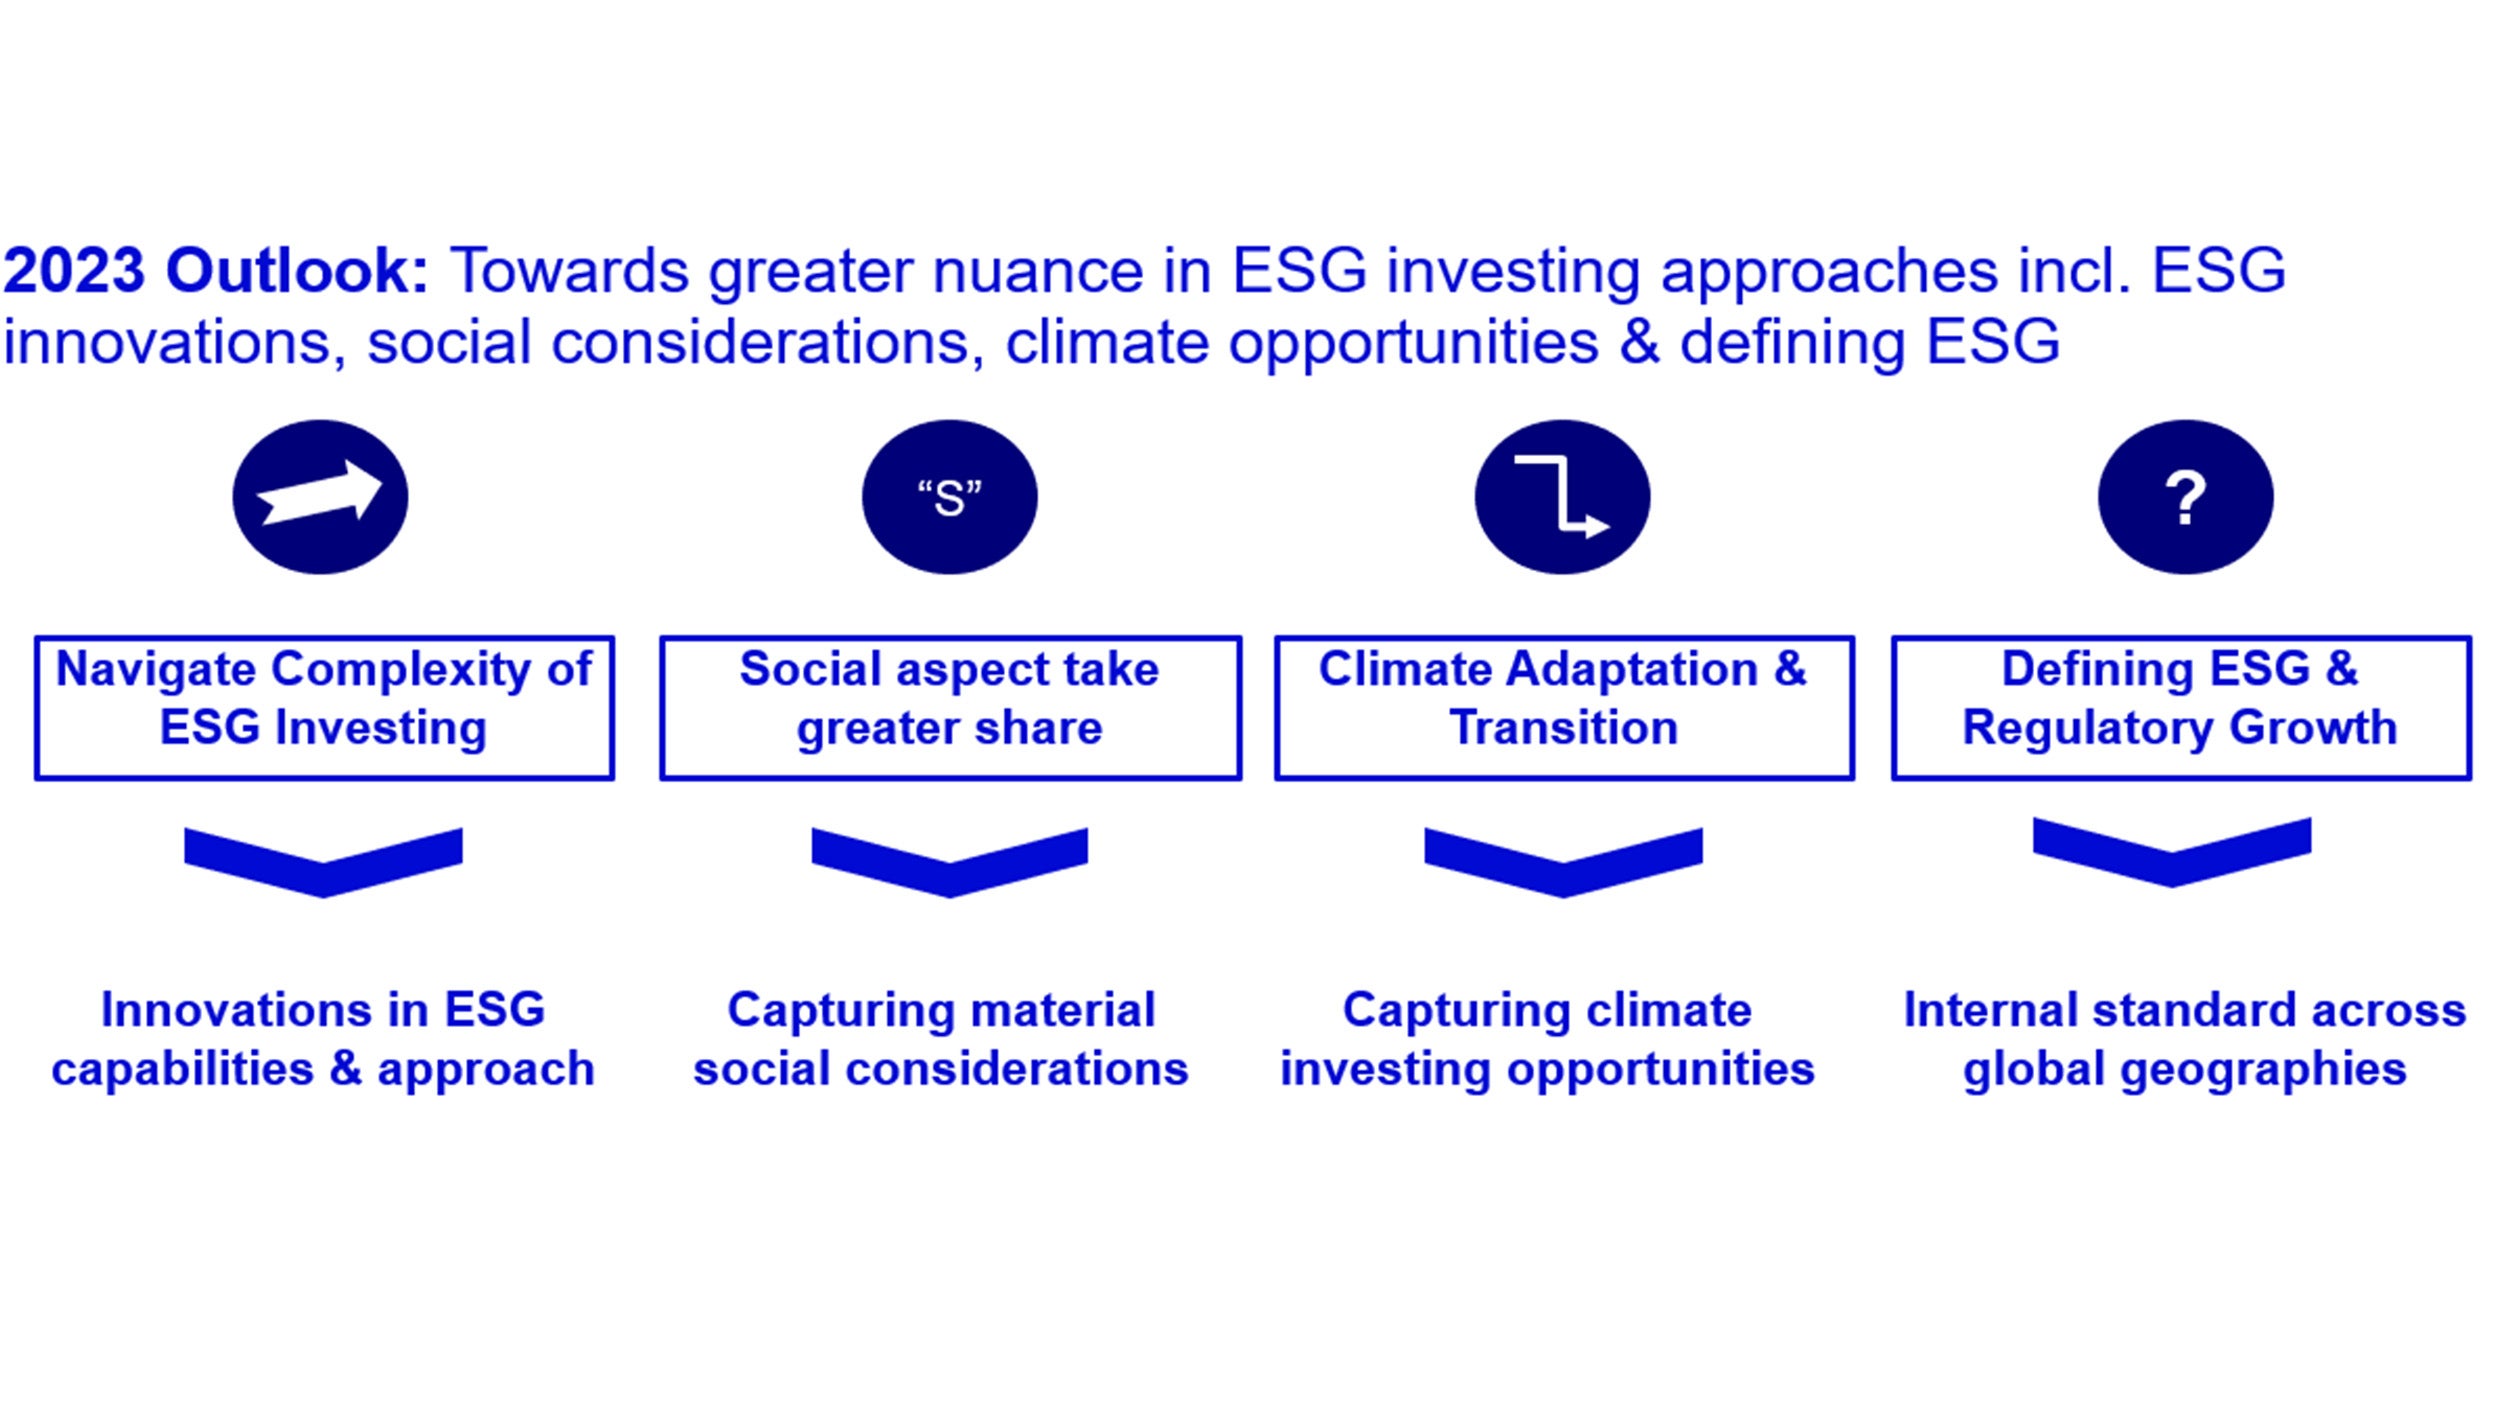 Themes that Invesco’s Global ESG team are paying particular attention to in 2023 include: